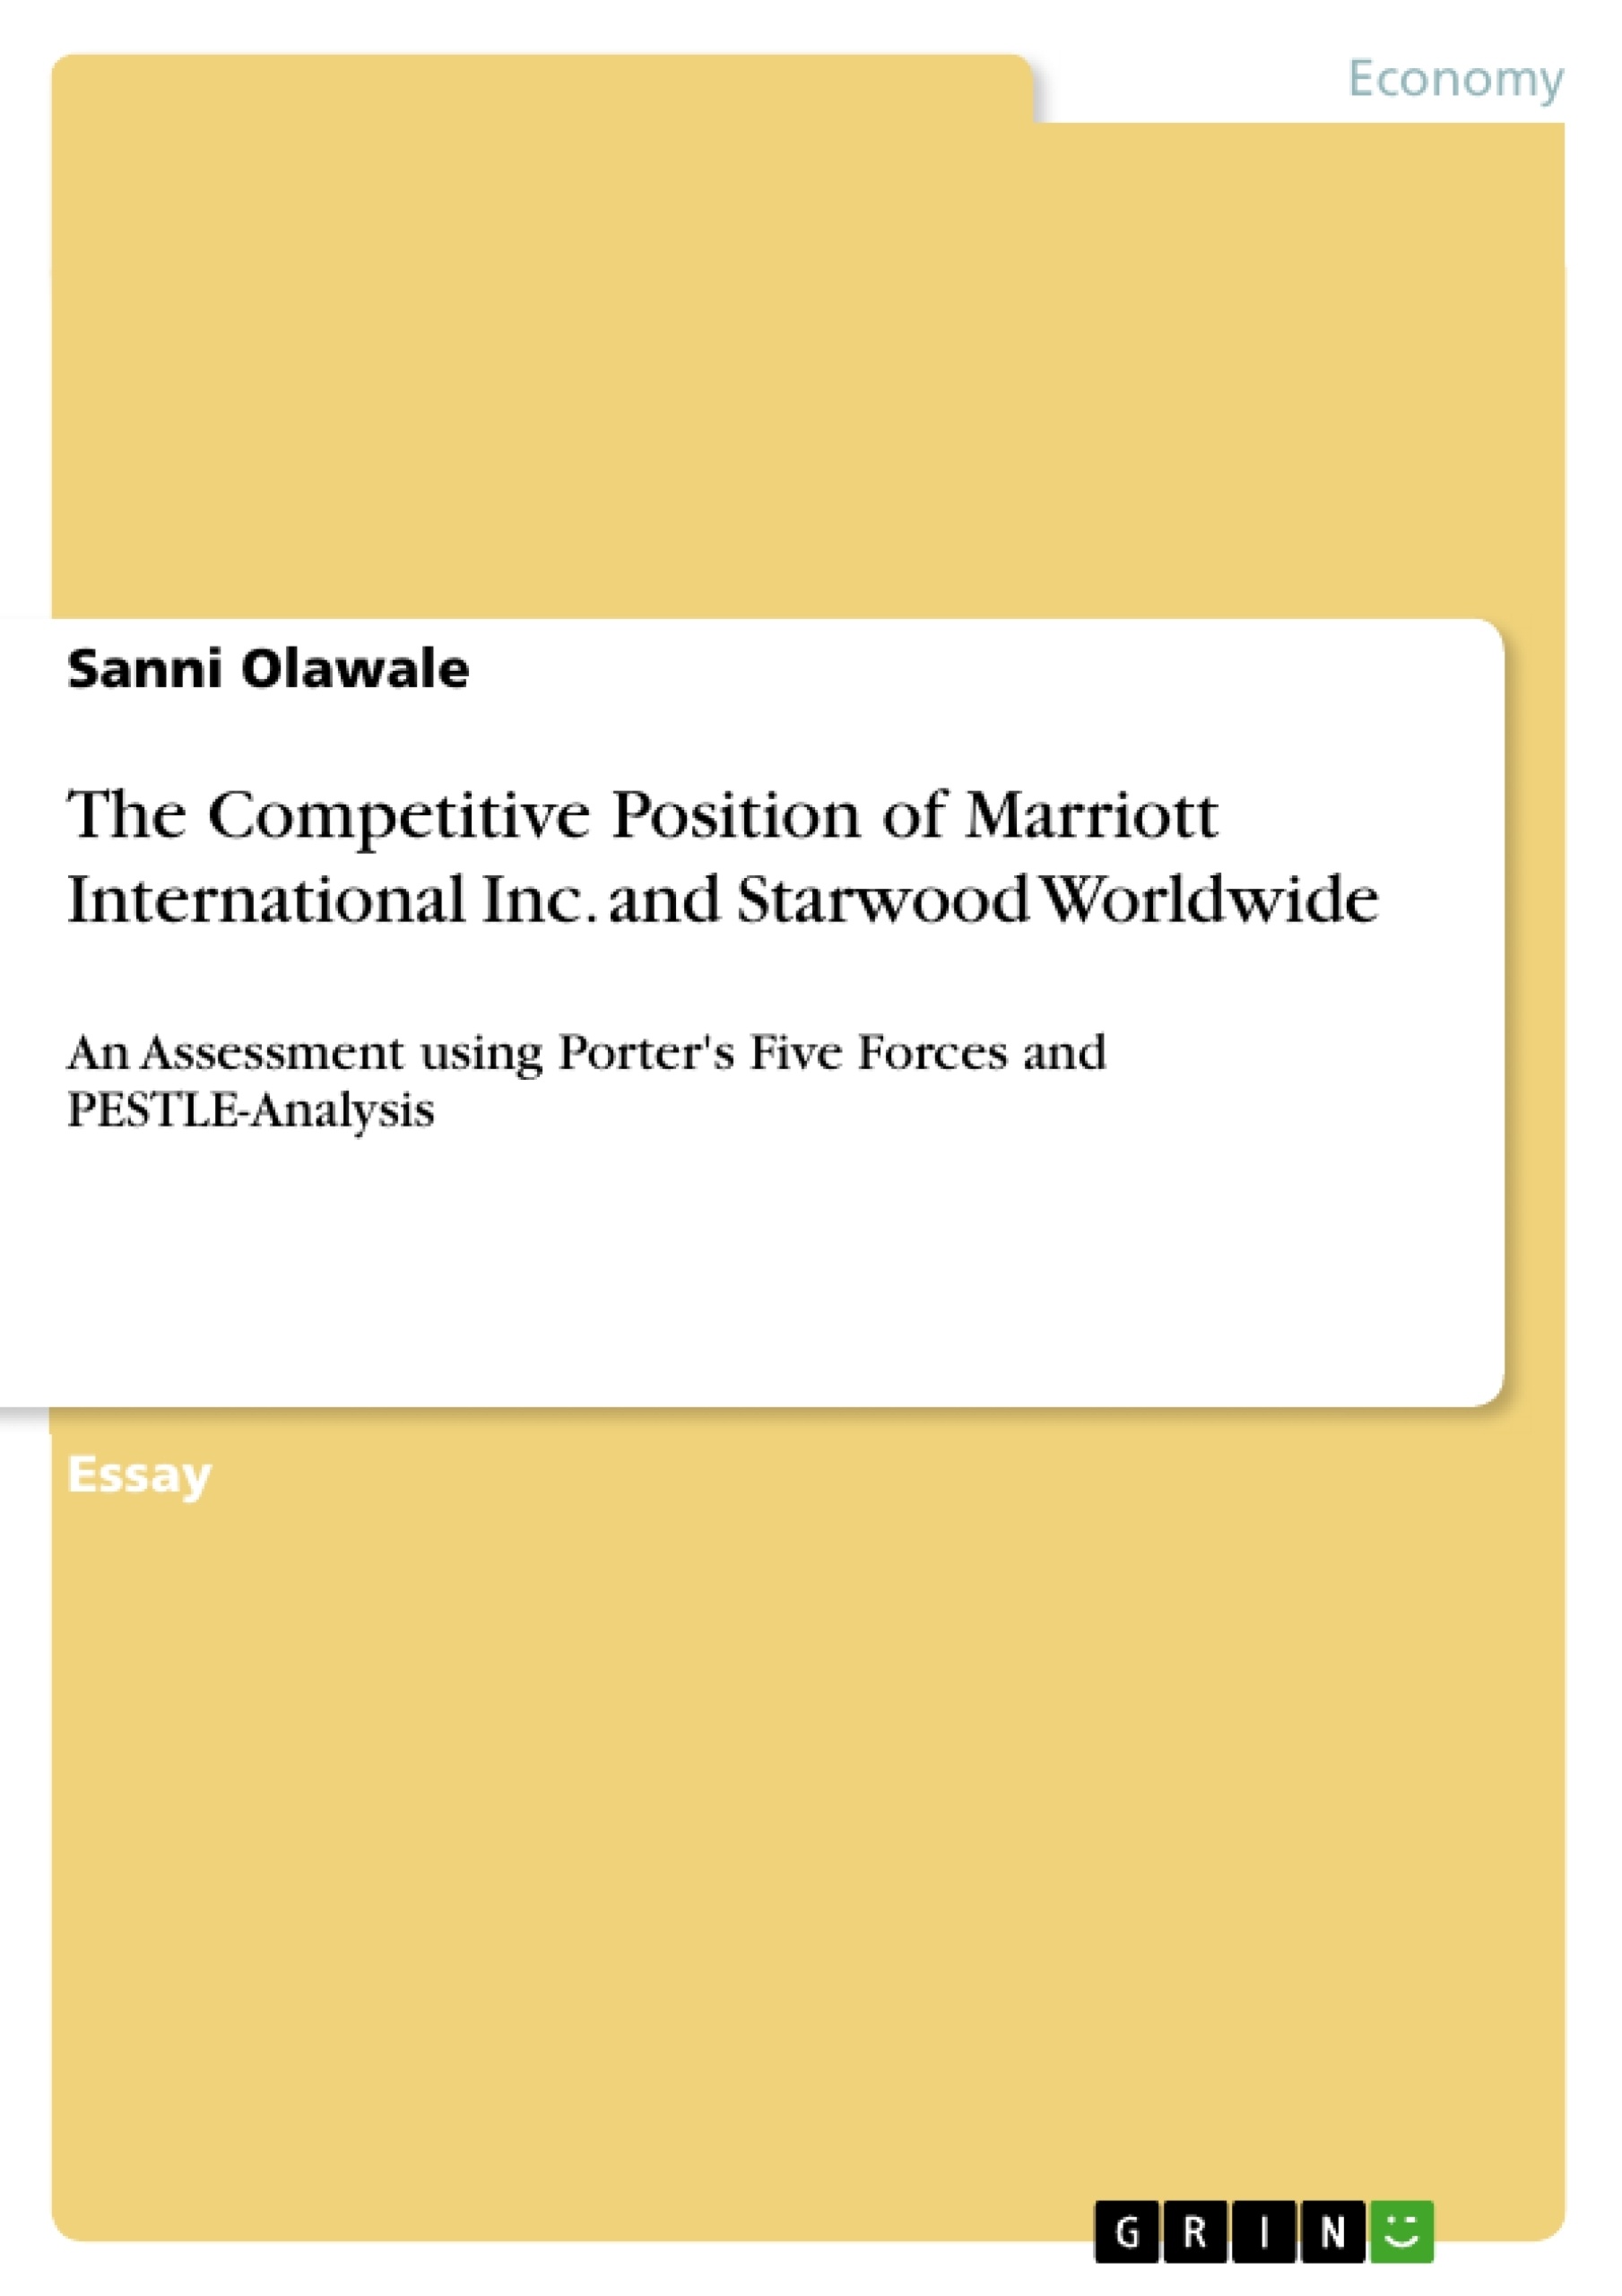 Title: The Competitive Position of Marriott International Inc. and Starwood Worldwide